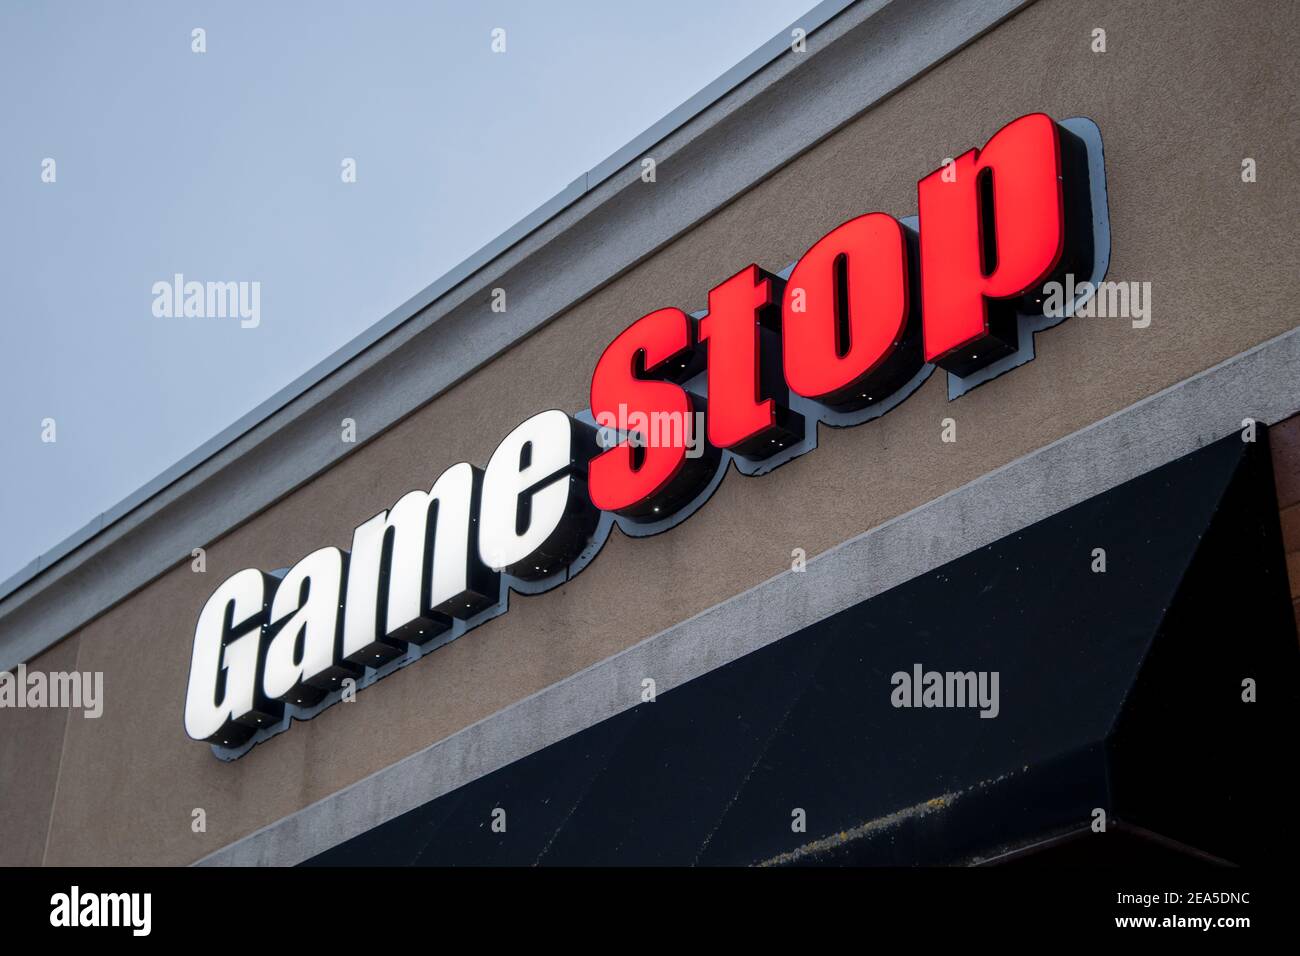 Gamestop Store High Resolution Stock Photography and Images - Alamy